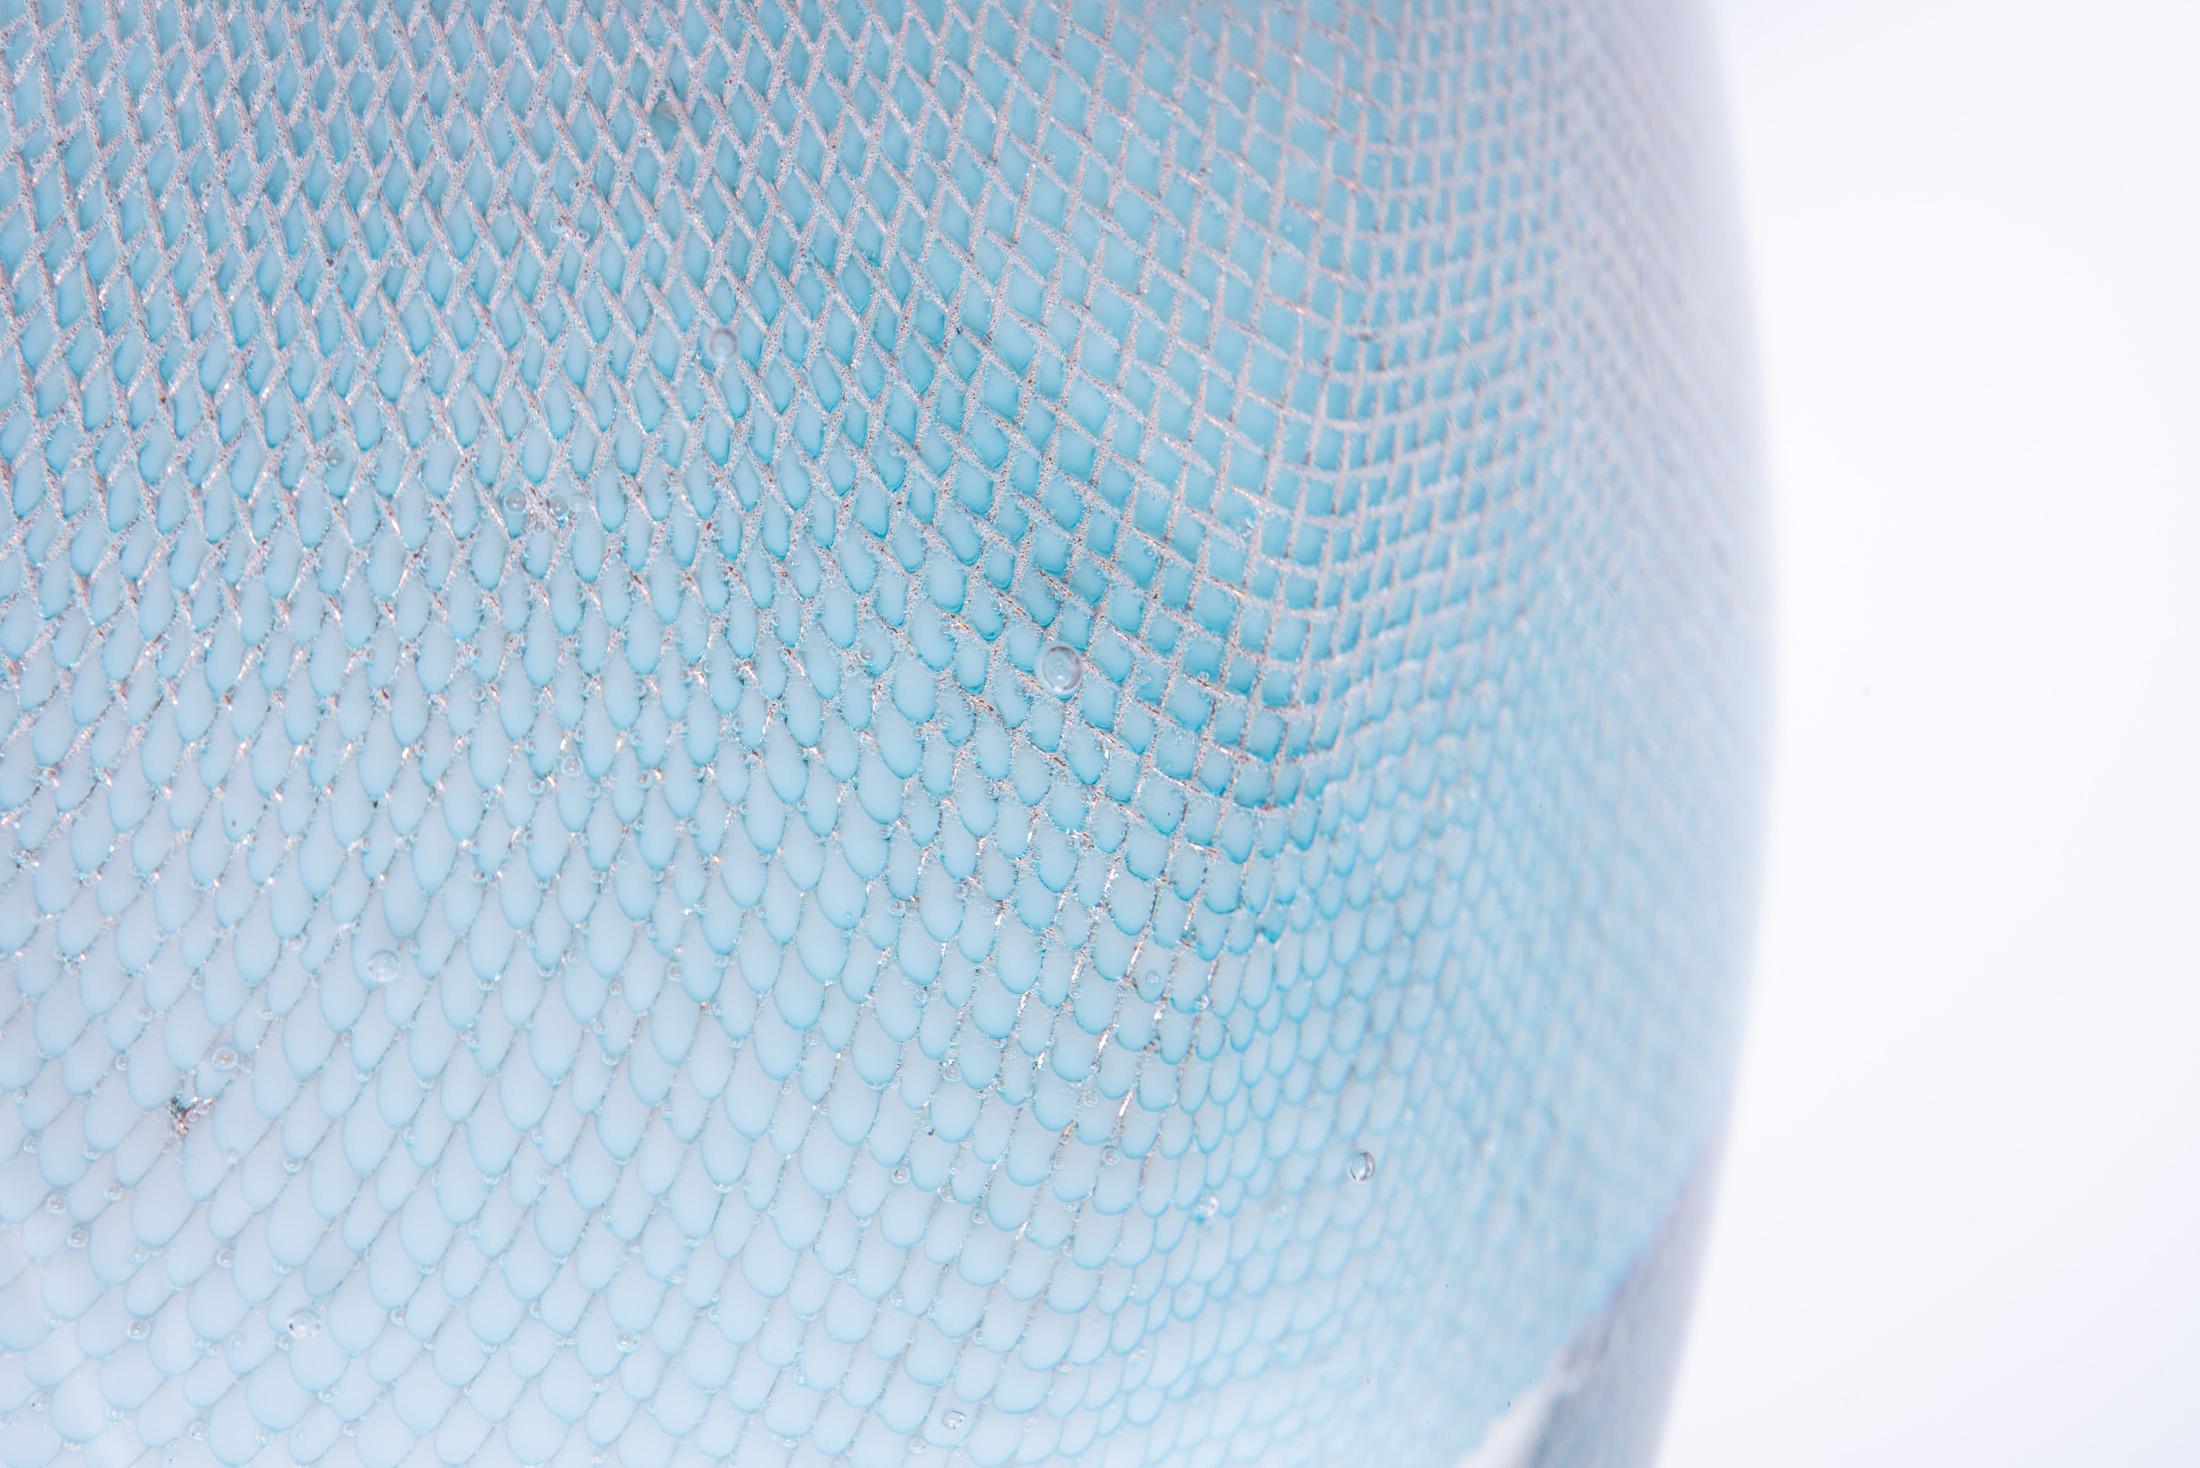 Glass and Copper Mesh Vase by Omer Arbel for OAO Works, Light Blue im Zustand „Neu“ im Angebot in Vancouver, British Columbia